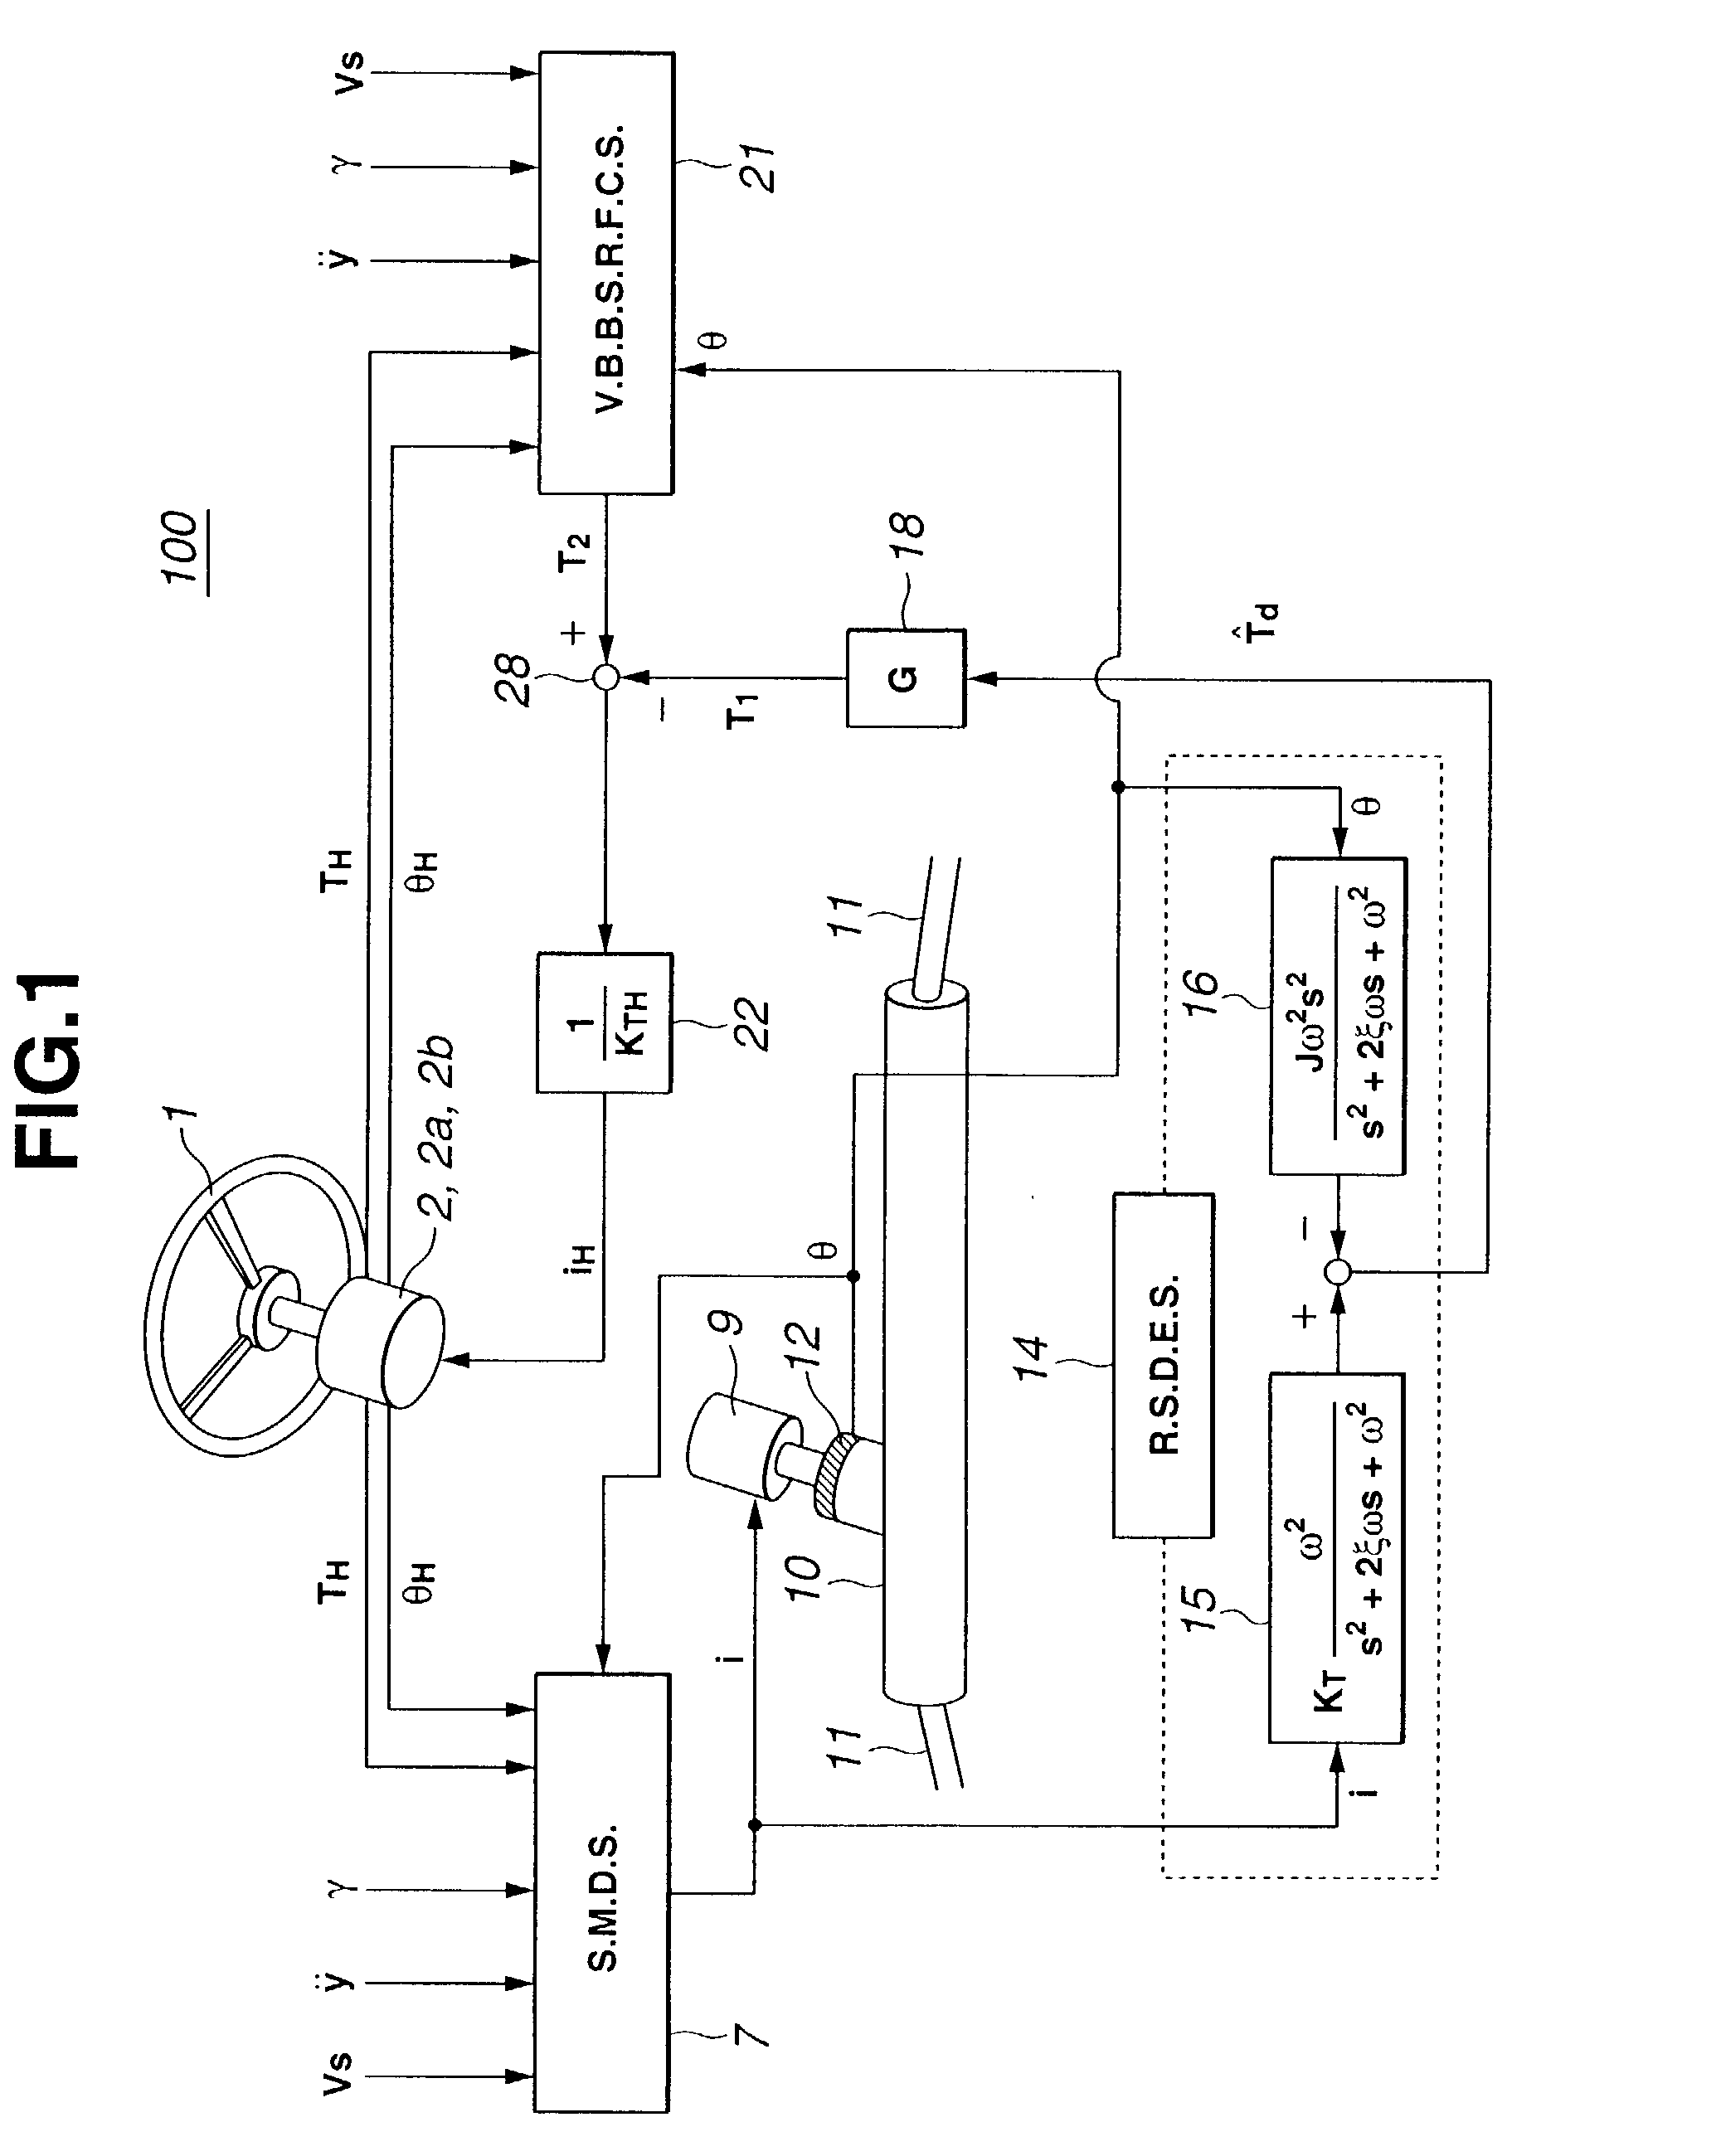 Vehicle steering control system